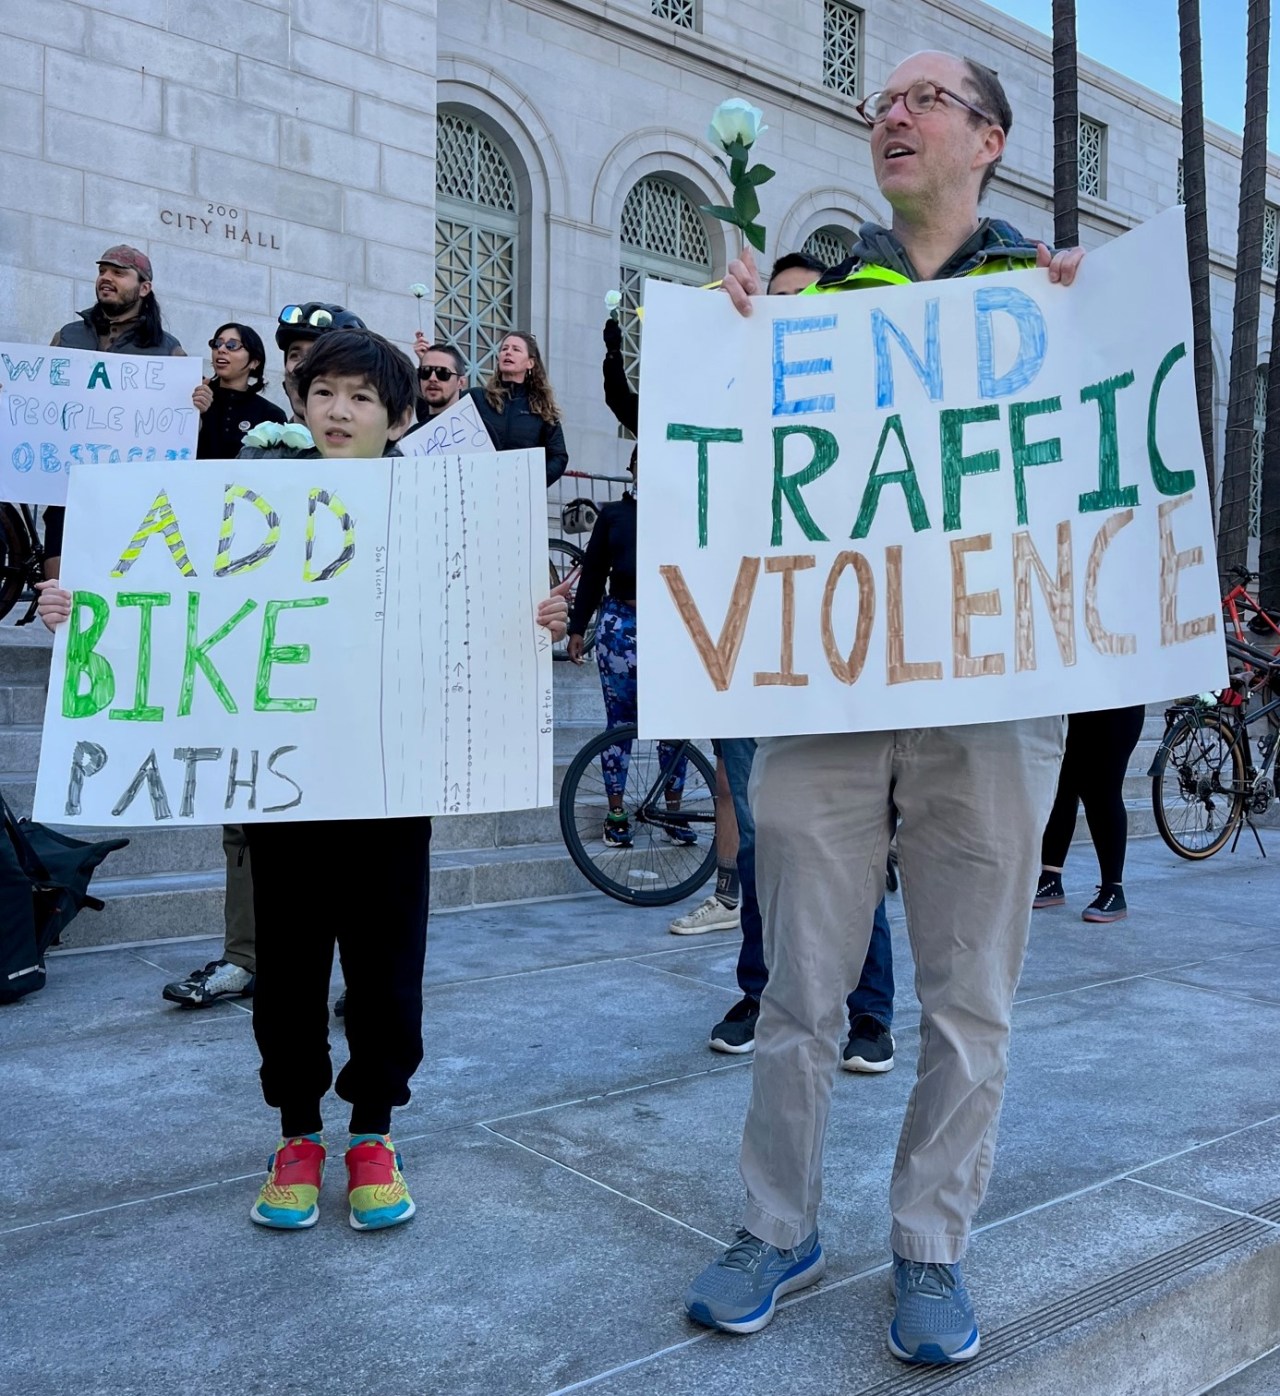 Protestors carrying signs for ending traffic violence and adding more bikeways